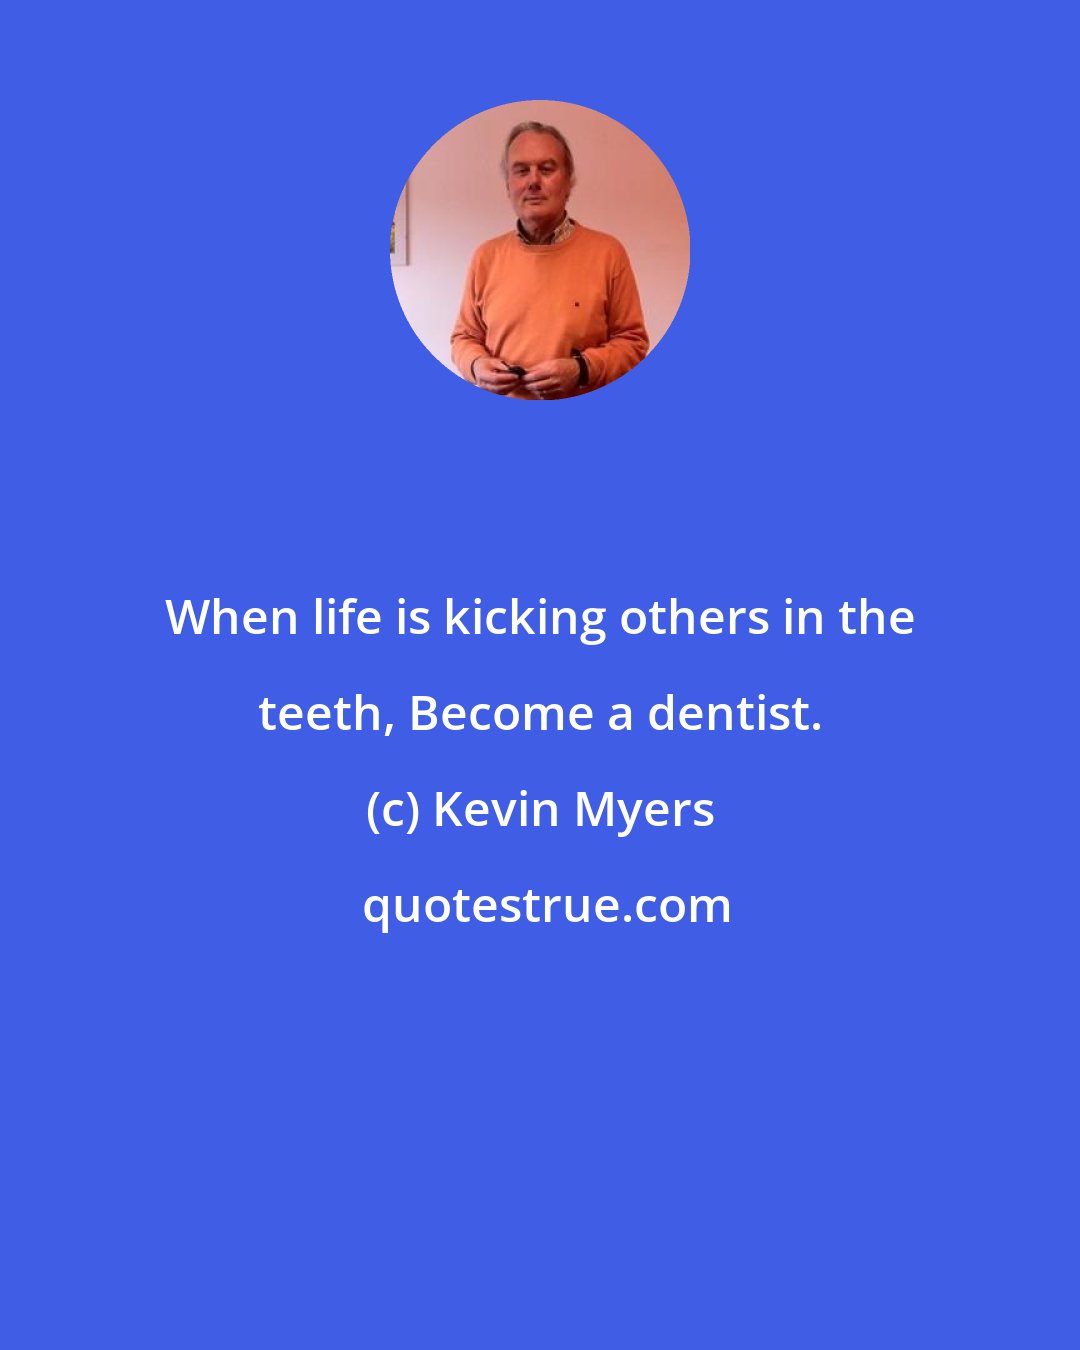 Kevin Myers: When life is kicking others in the teeth, Become a dentist.